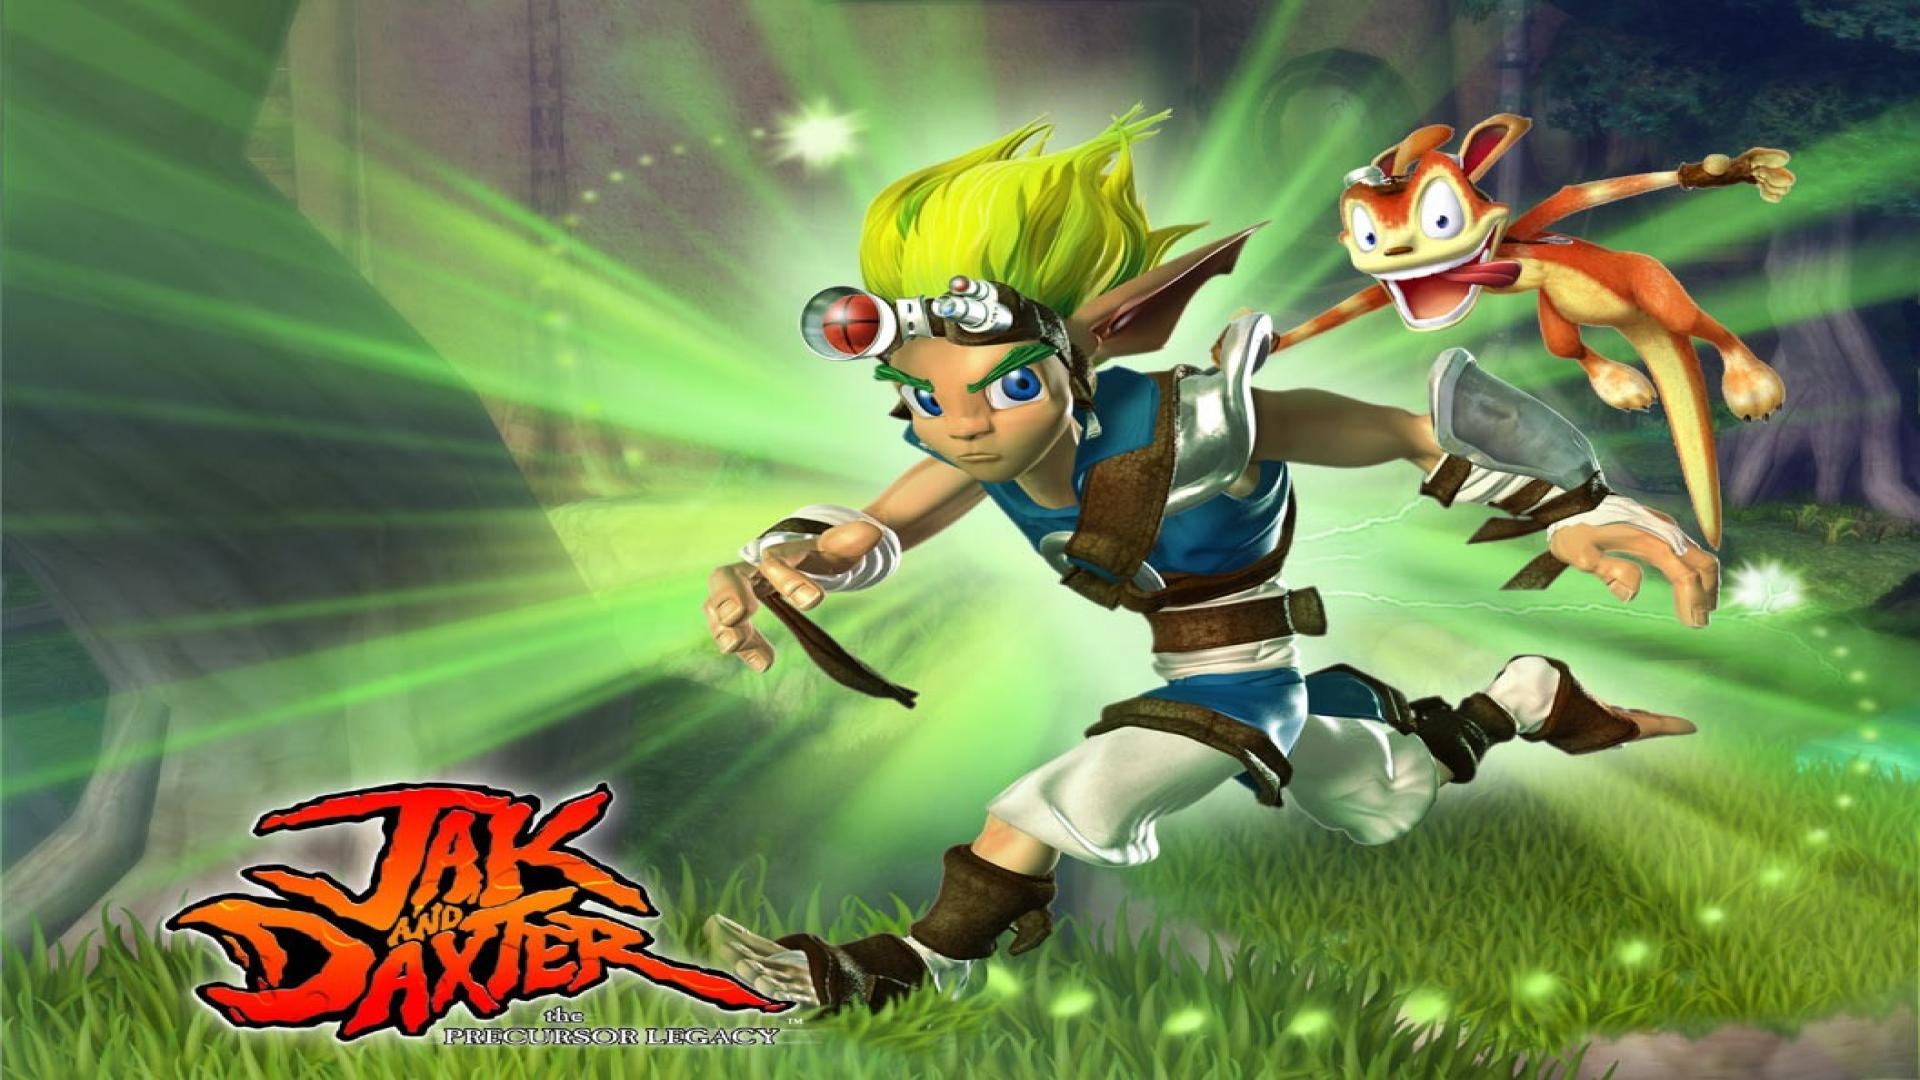 Game jack 2. Jak and Daxter 2. Jak and Daxter 1. Джек и Декстер игра. Jak and Daxter: the precursor Legacy.